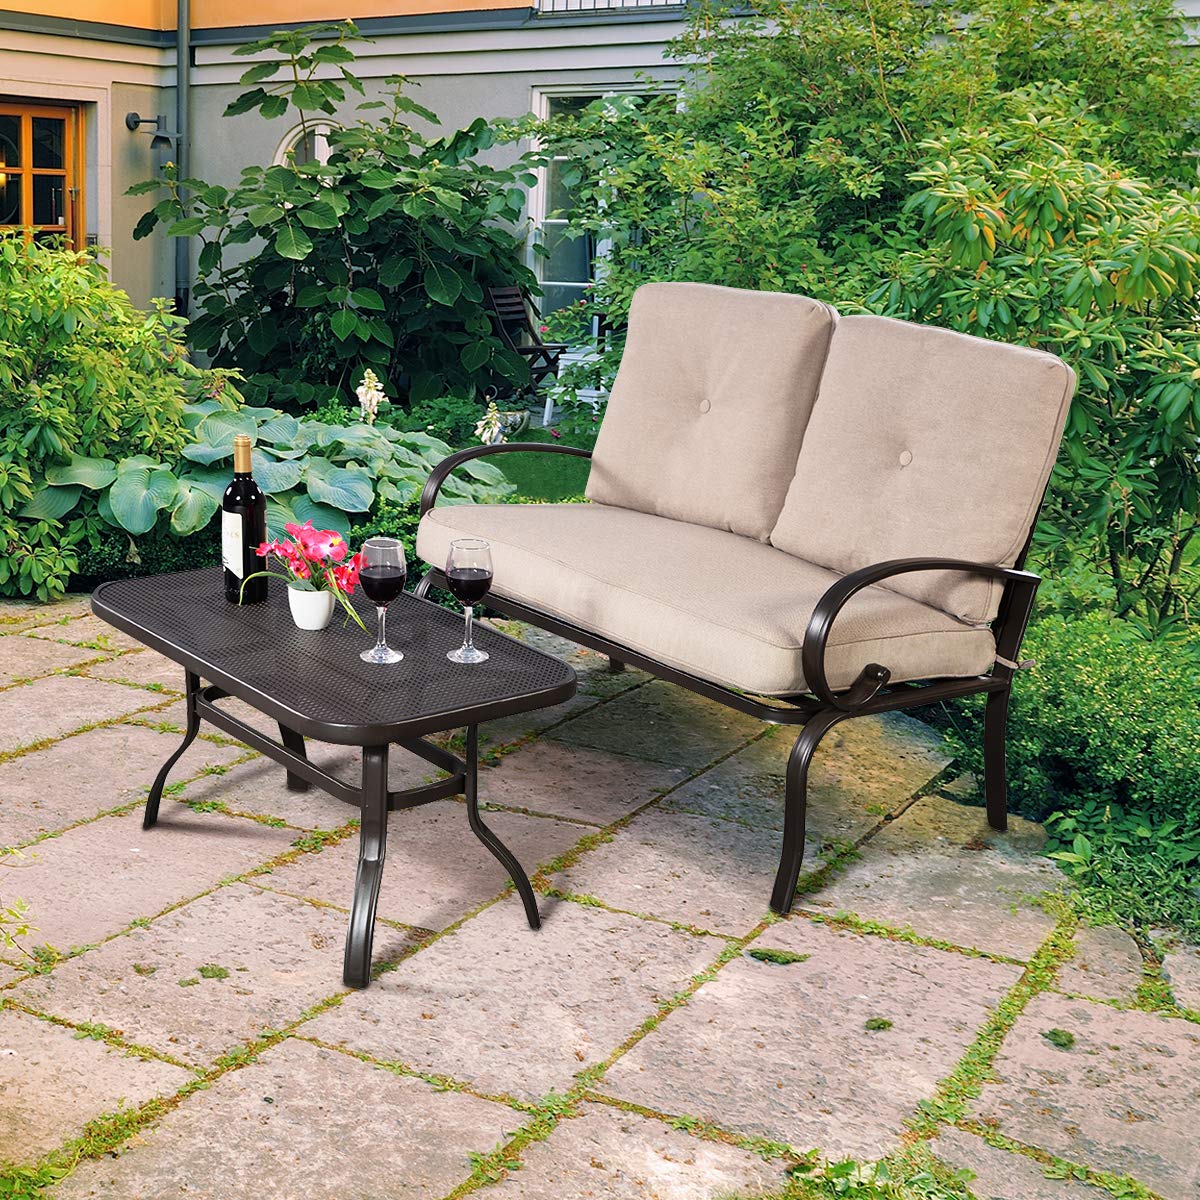 How to Choose the Best Small Space Patio & Outdoor Furniture in 18